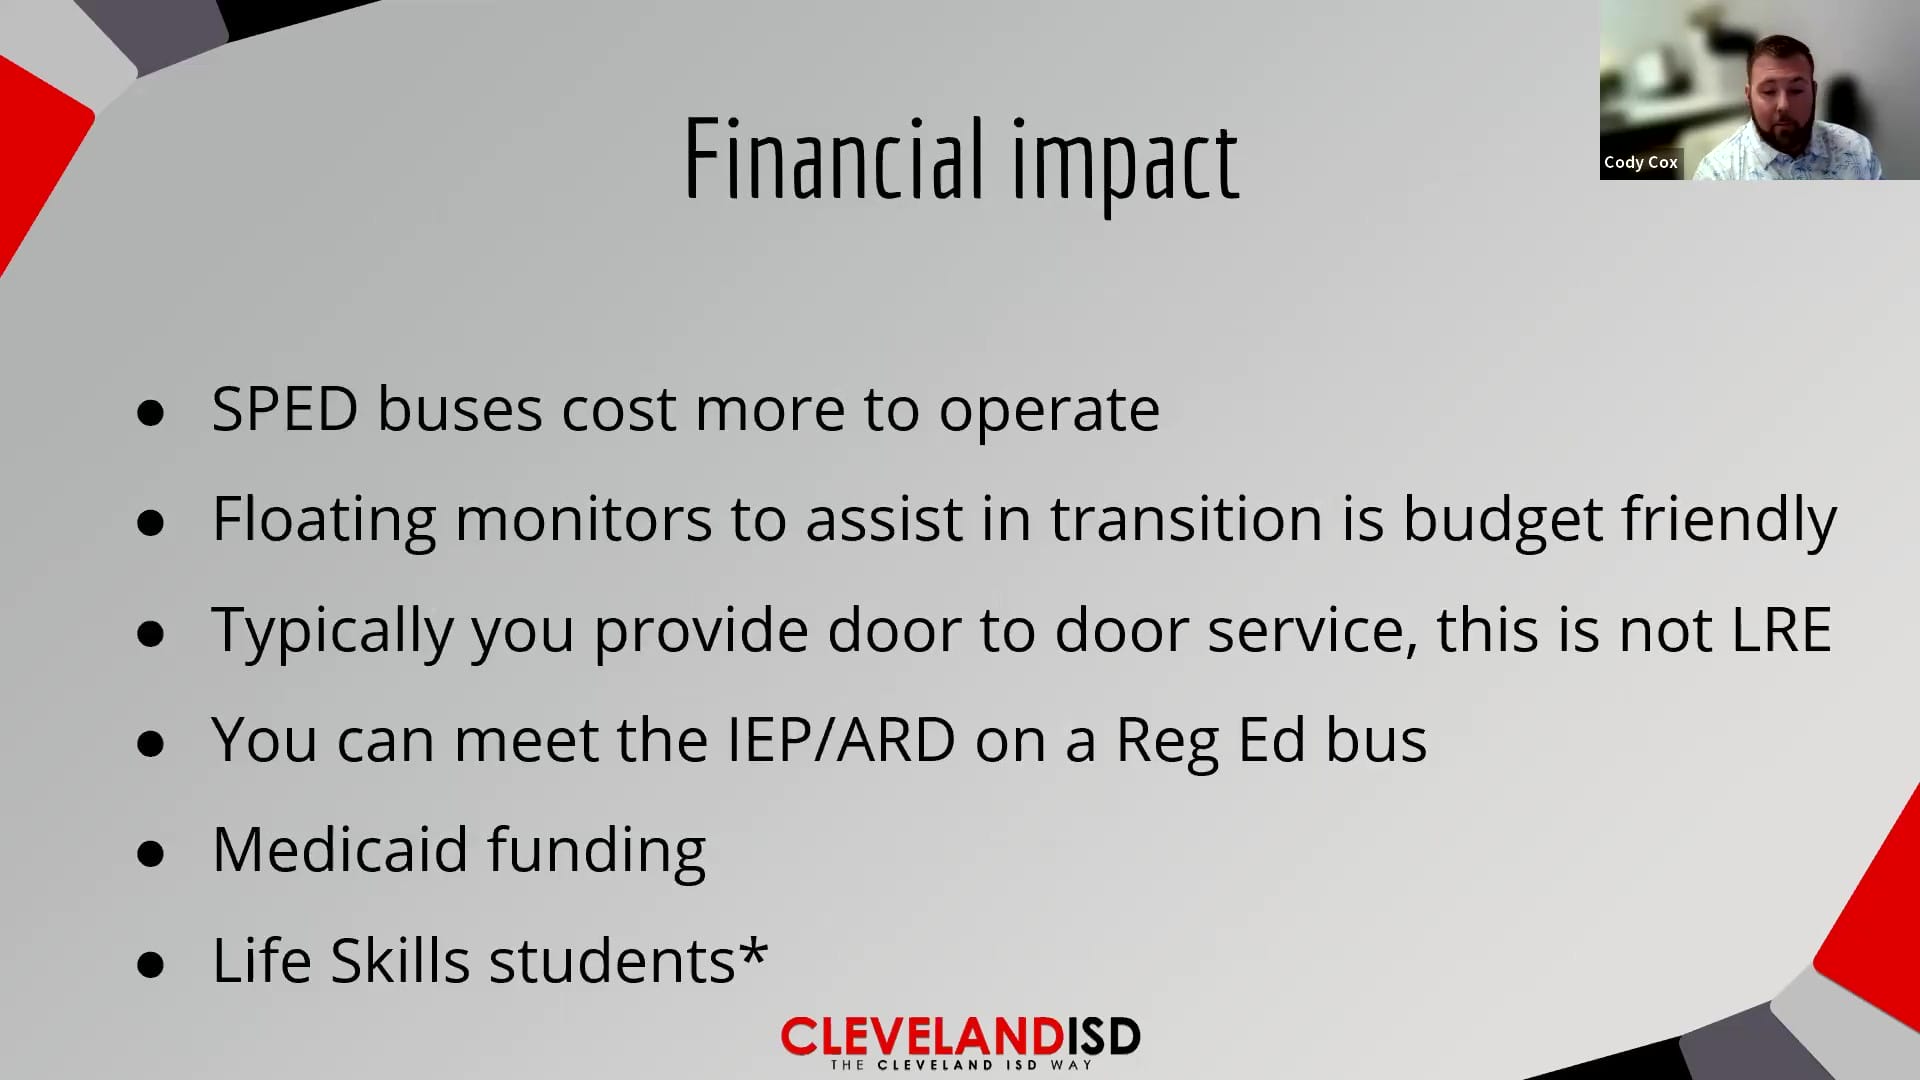 Transporting Students with Disabilities Financial Impact